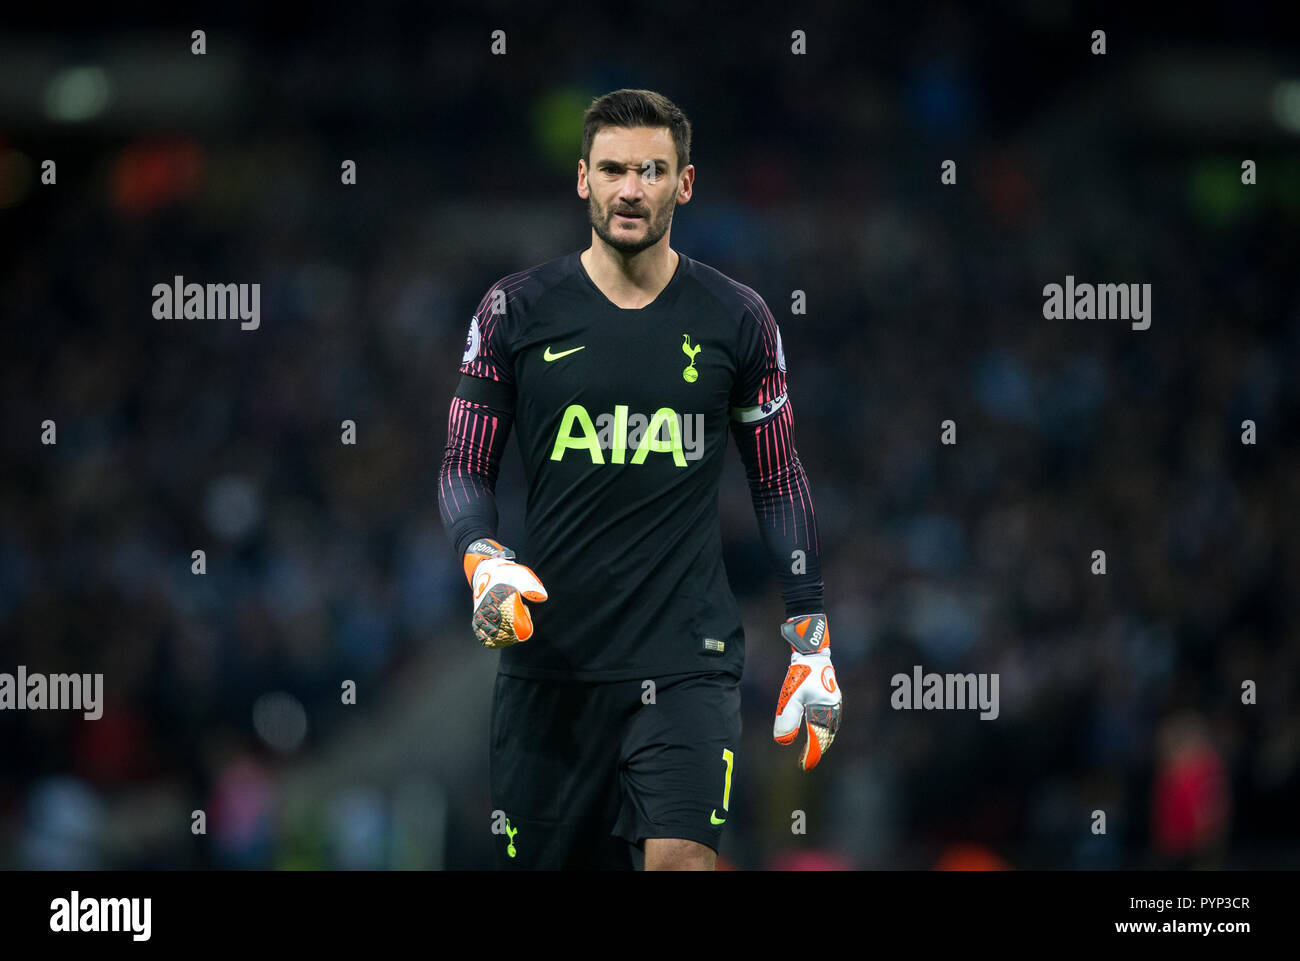 Goalkeeper Hugo Lloris of Spurs during the Premier League match between  Tottenham Hotspur and Manchester City at Wembley Stadium, London, England  on 29 October 2018. Photo by Andy Rowland. . (Photograph May